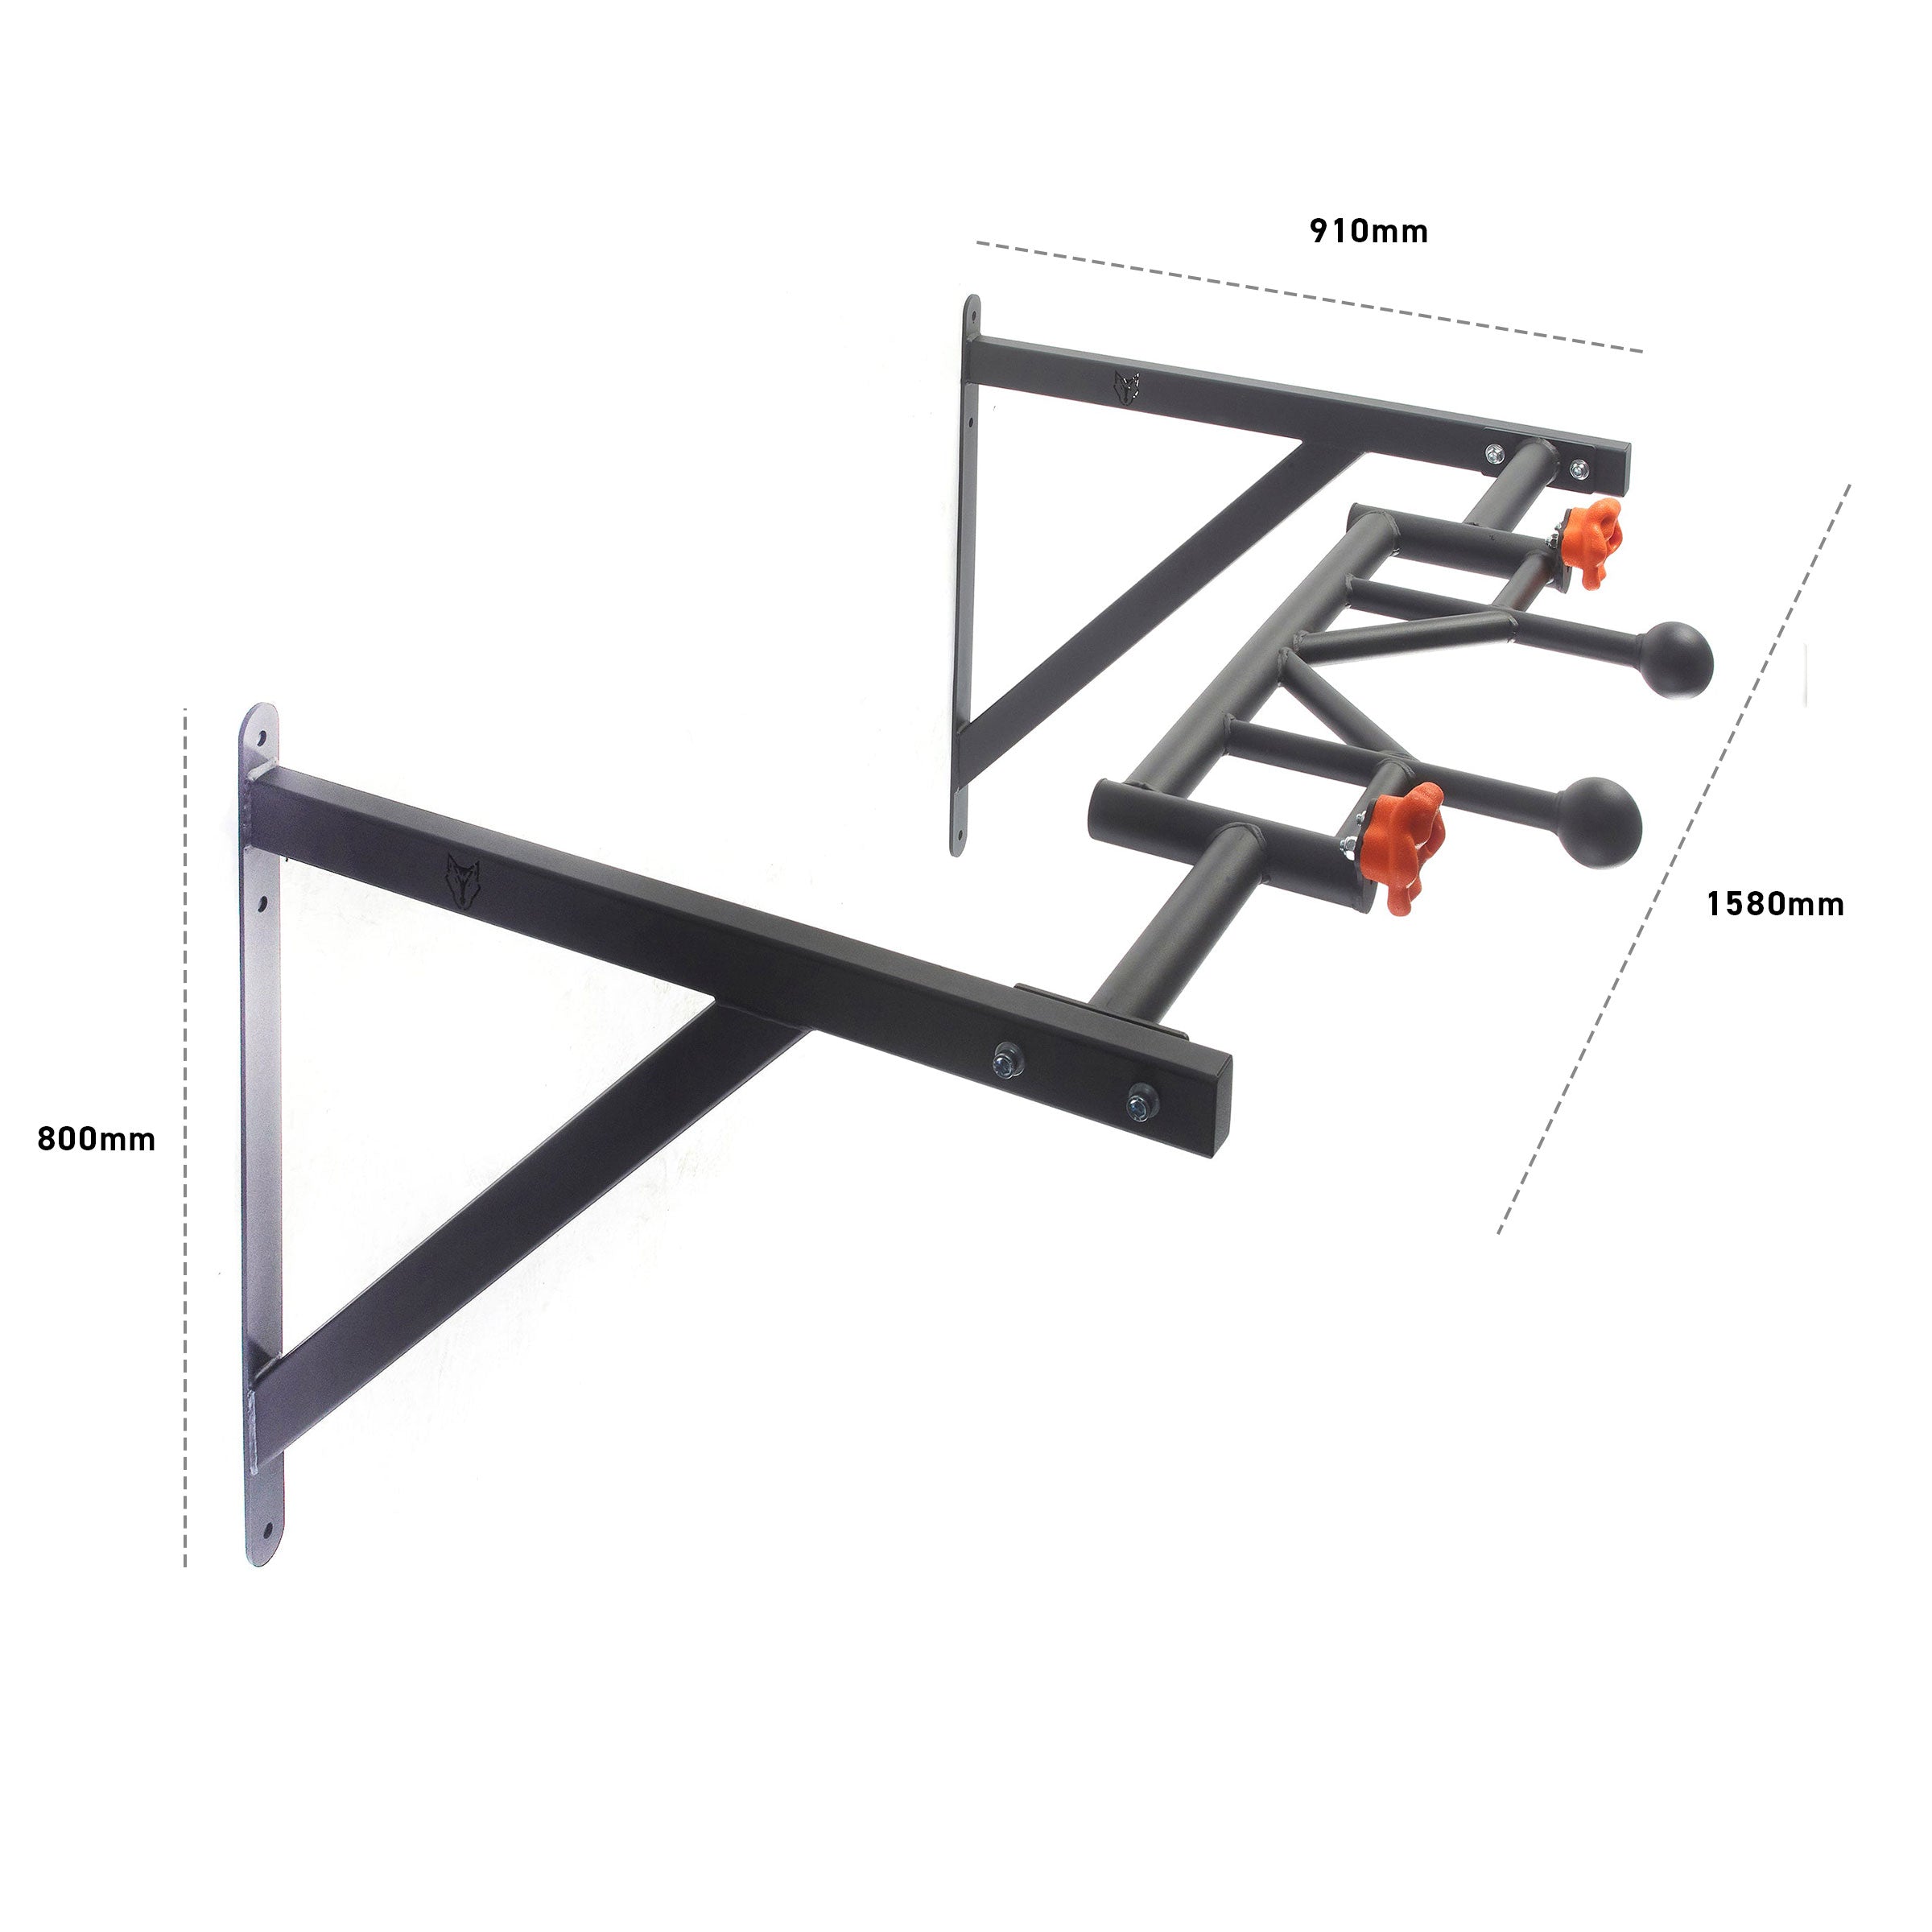 Wolverson Multi-Grip Pull-Up Bar - Wolverson Fitness